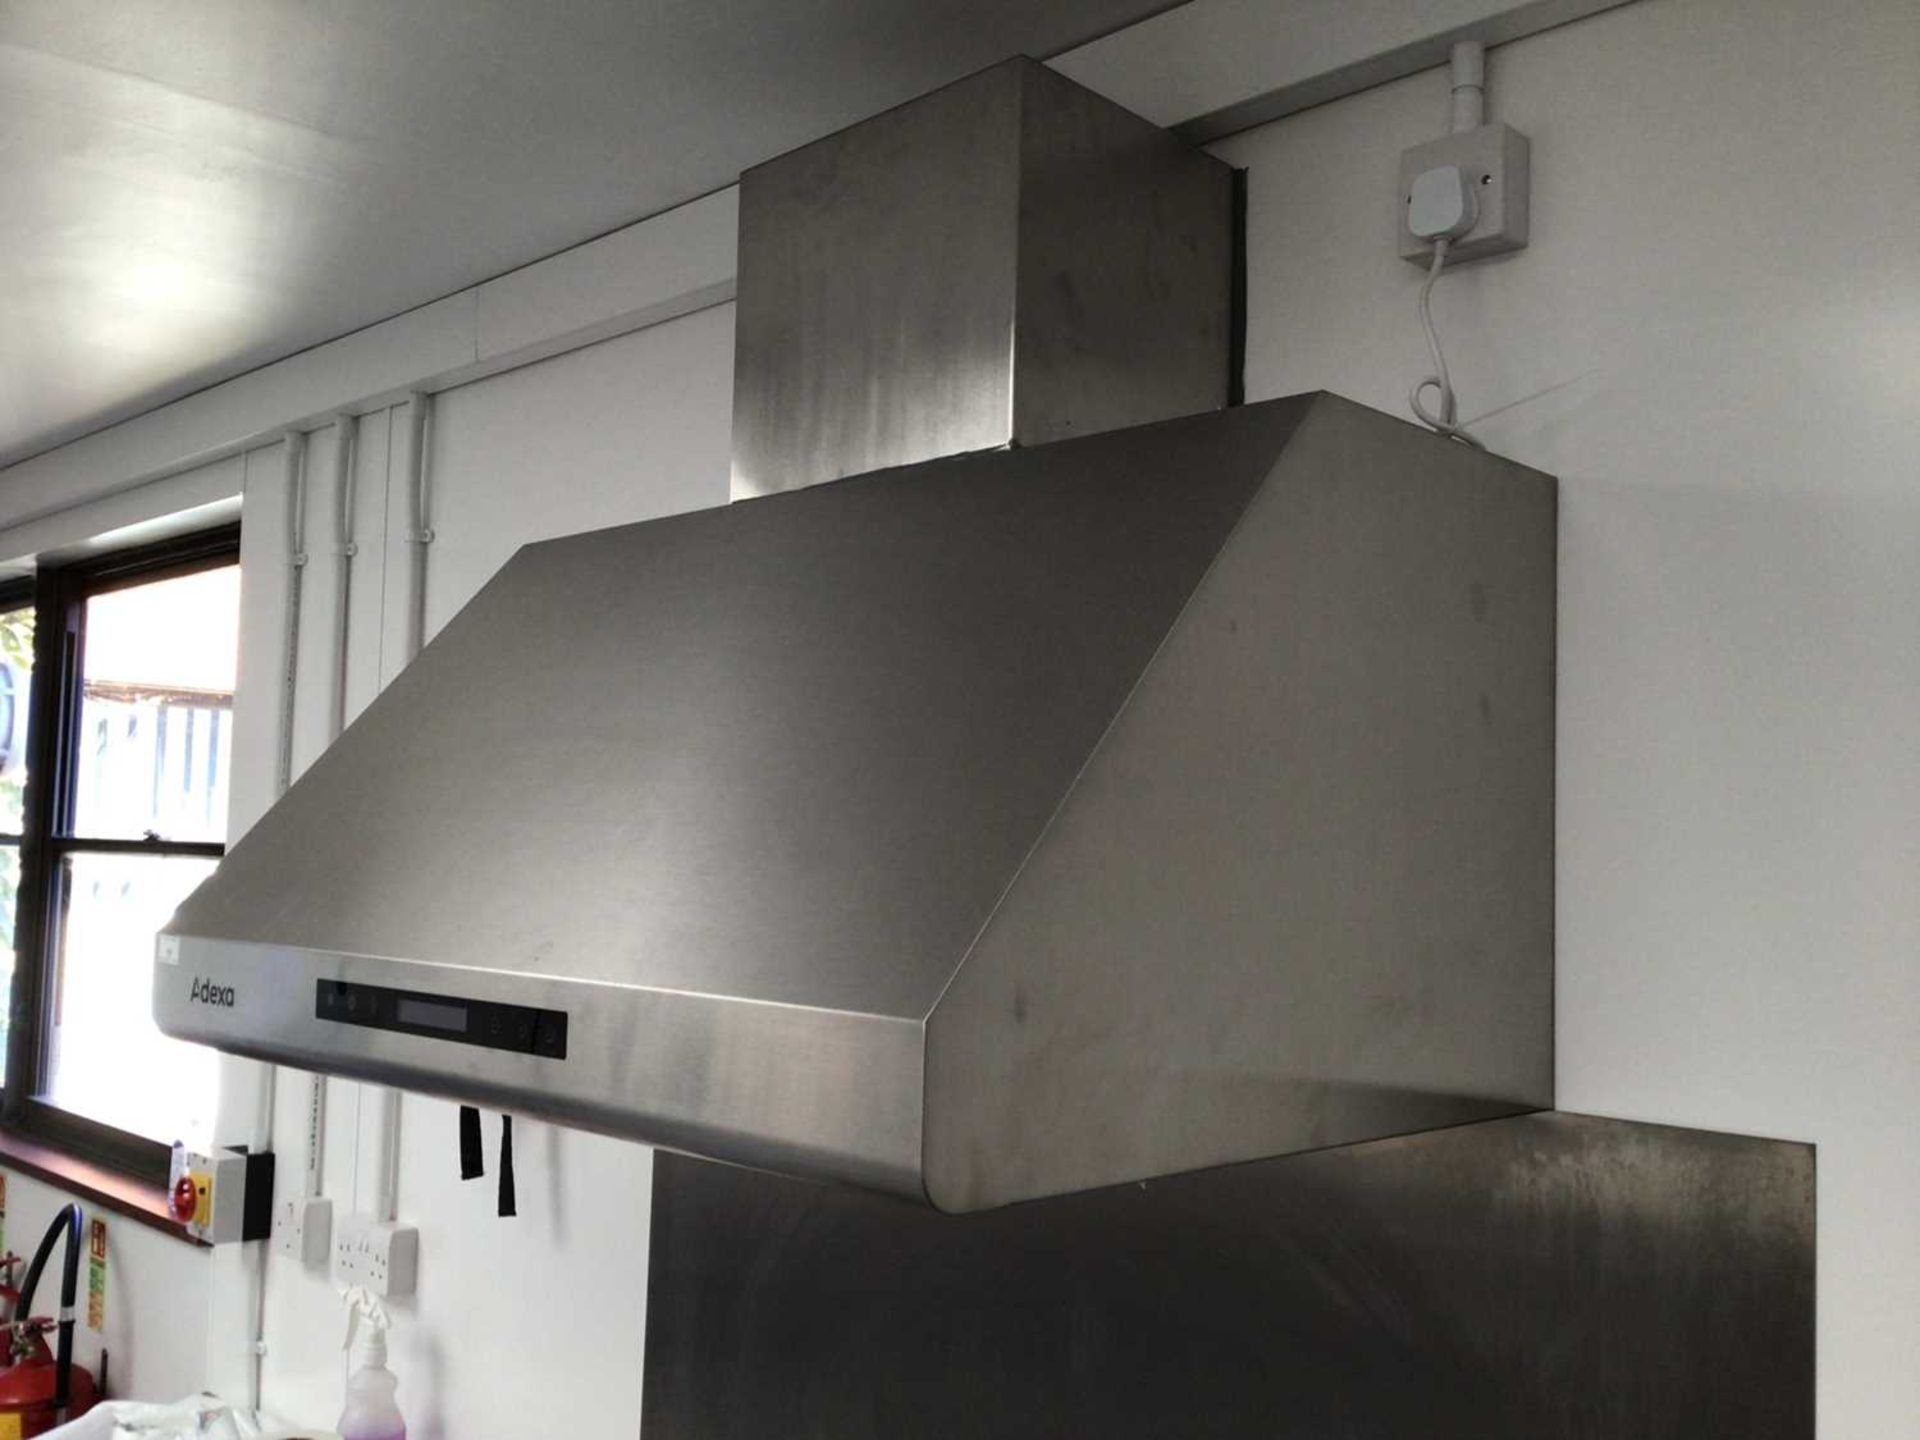 An Adela stainless steel fume canopy, cable and plug, 900 mm x 630 mm - Image 2 of 2